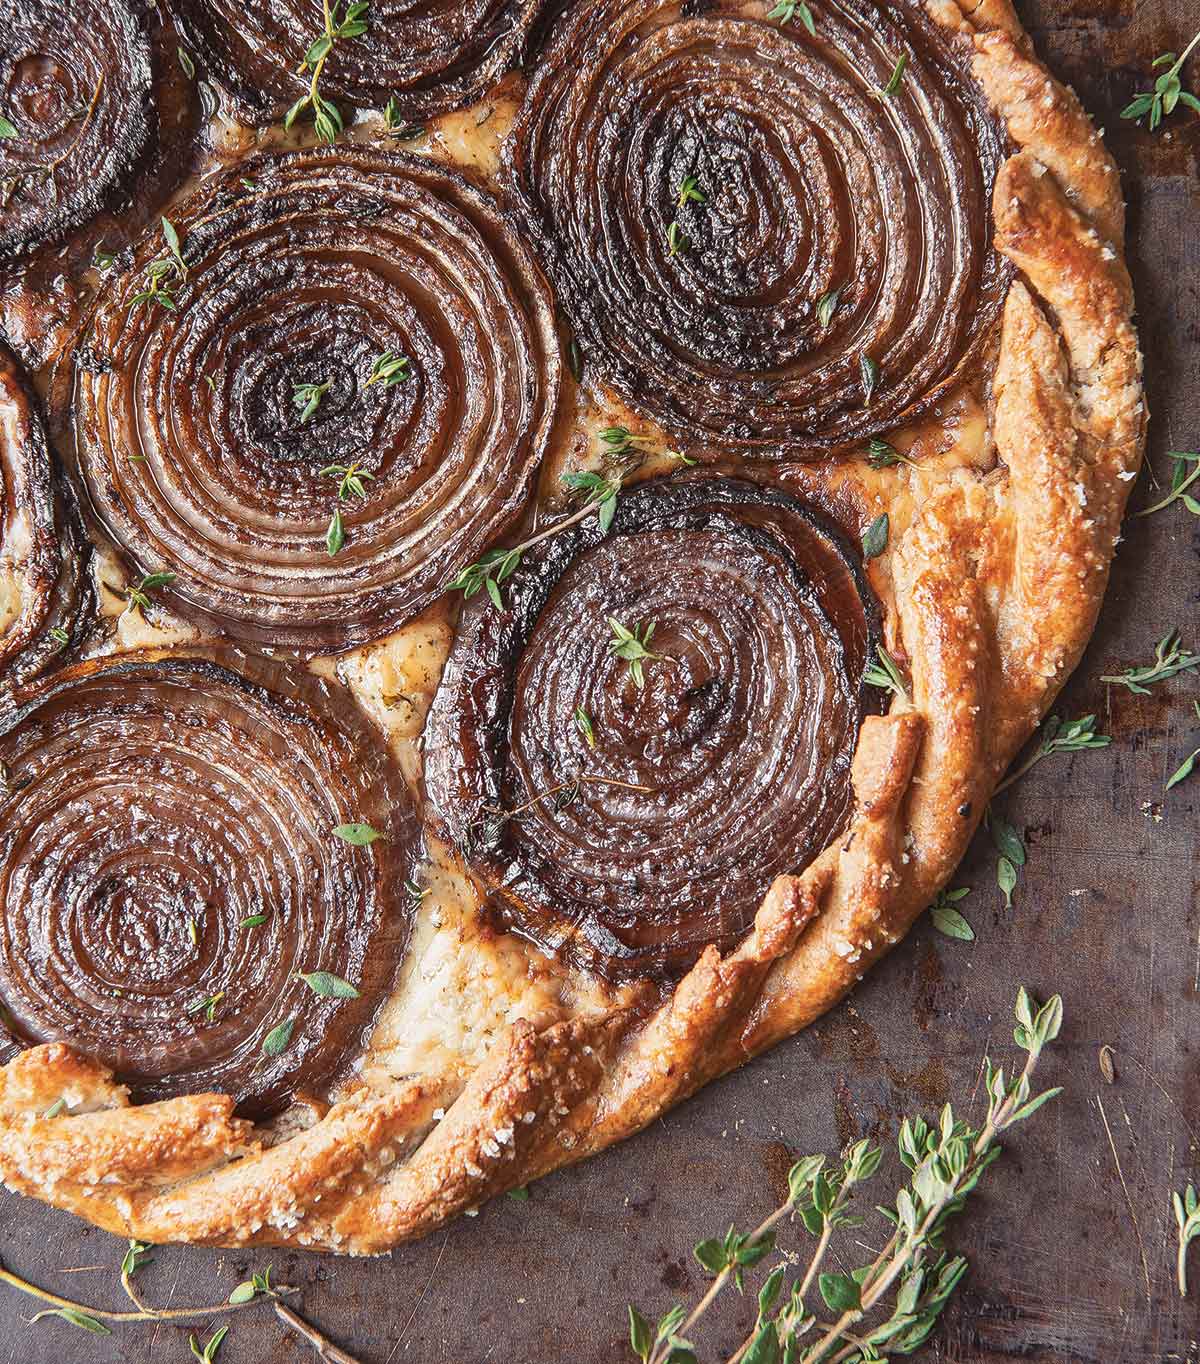 A tart with rounds of caramelized red onion and thyme leaves scattered around.